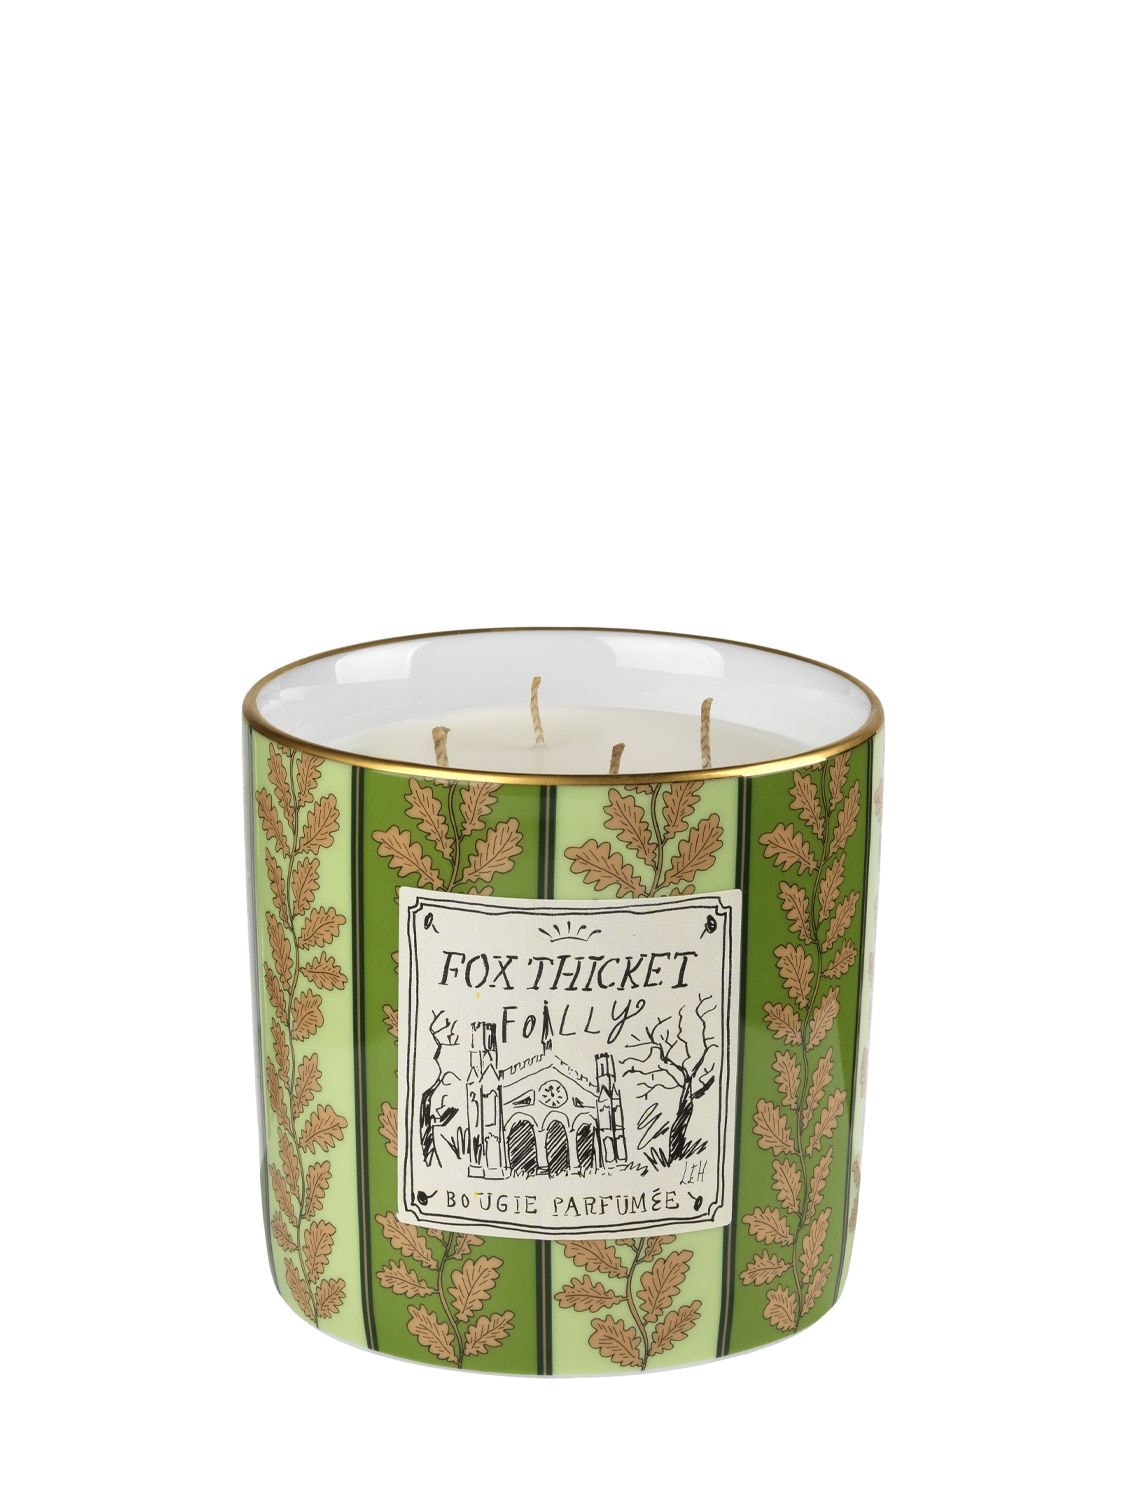 Ginori 1735 Fox Thicket Folly Large Scented Candle In Green